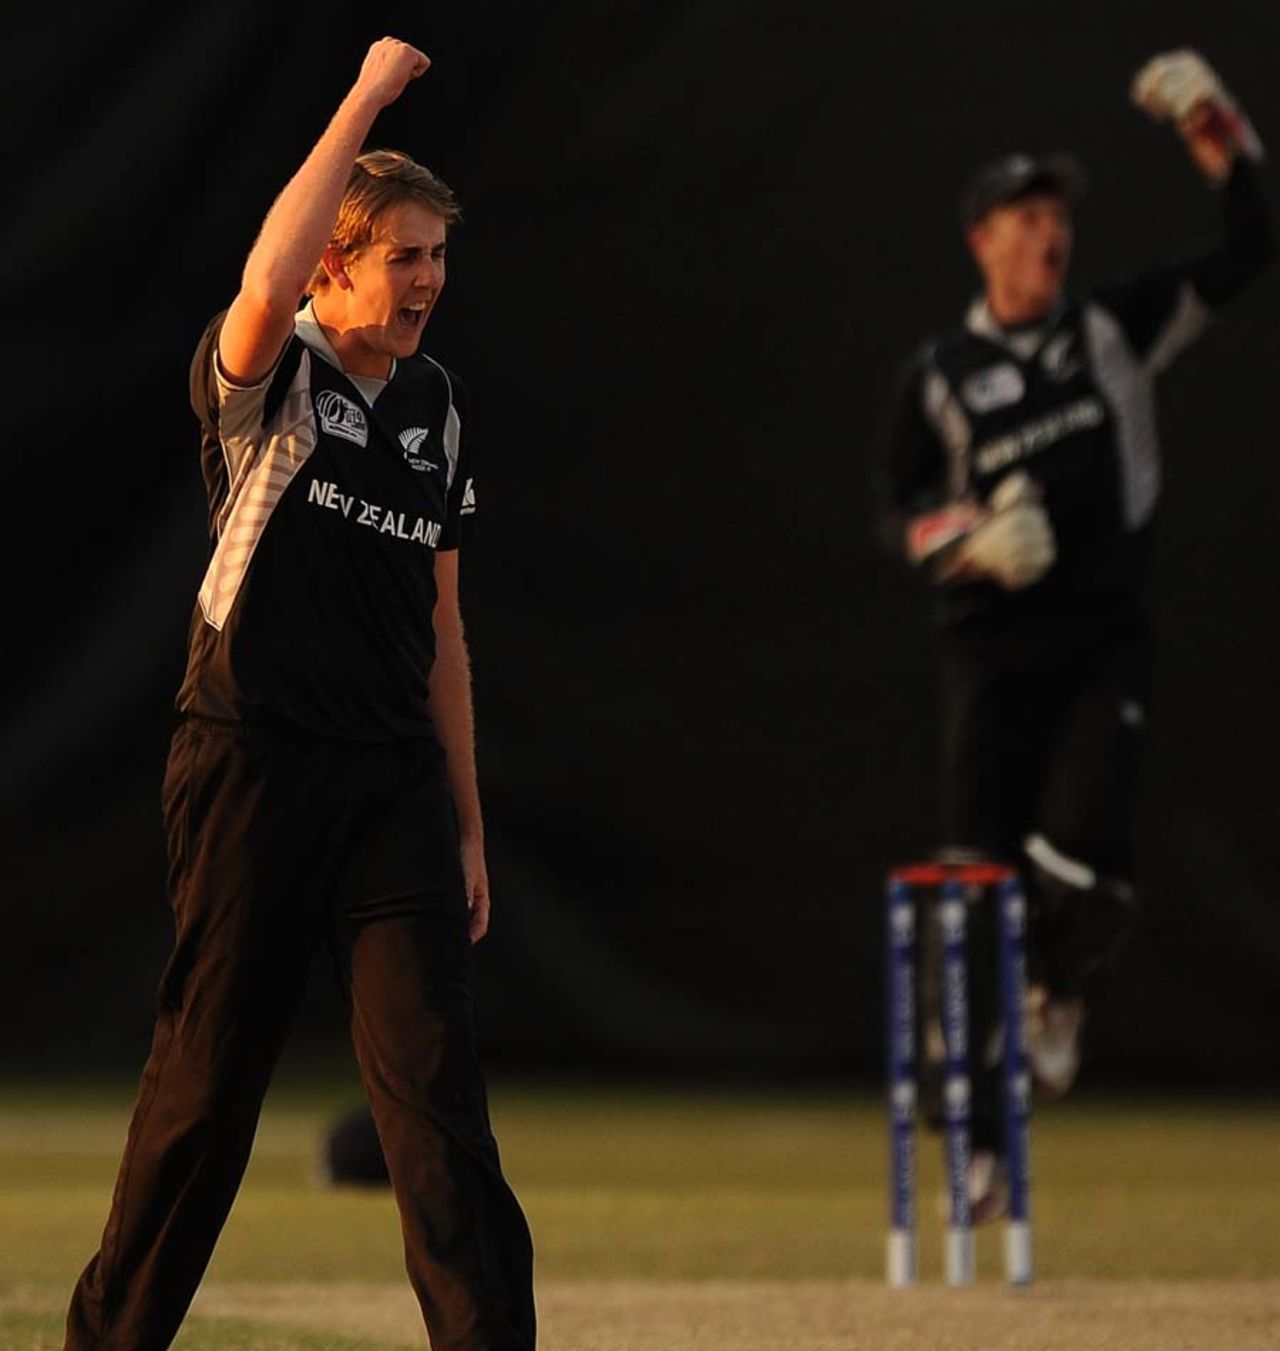 Matthew Quinn celebrates a wicket, Afghanistan v New Zealand, Group B, ICC Under-19 World Cup, Buderim, Aug 14, 2012